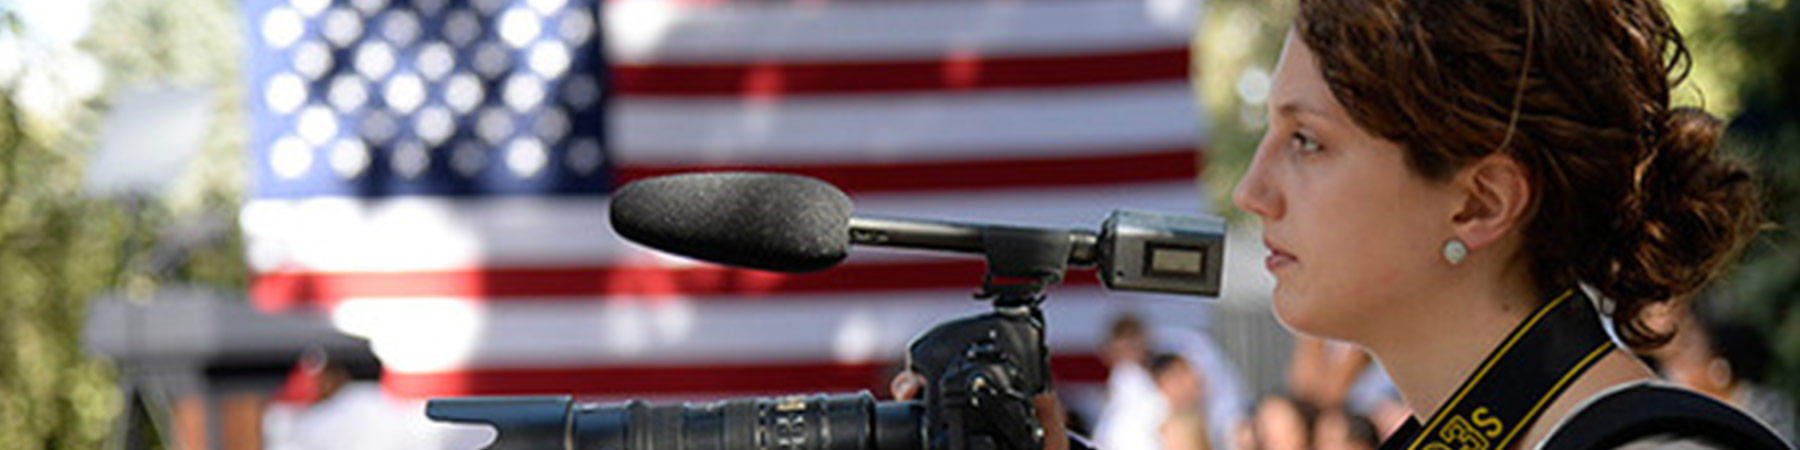 picture of a camera woman holding a camera in front of her with an American flag in the background